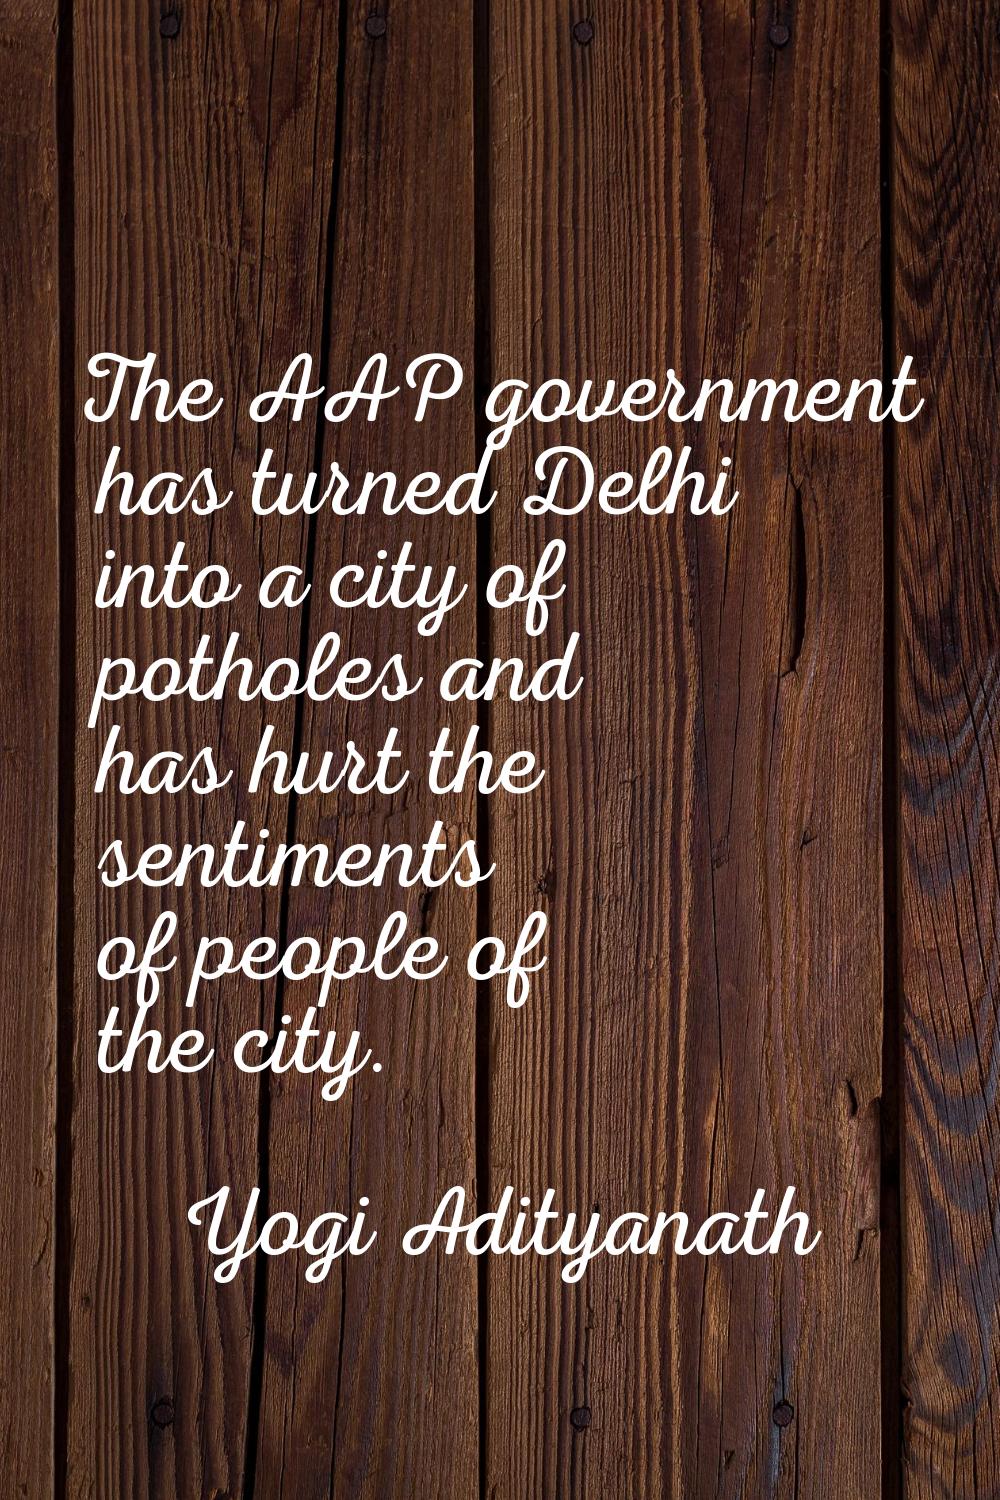 The AAP government has turned Delhi into a city of potholes and has hurt the sentiments of people o